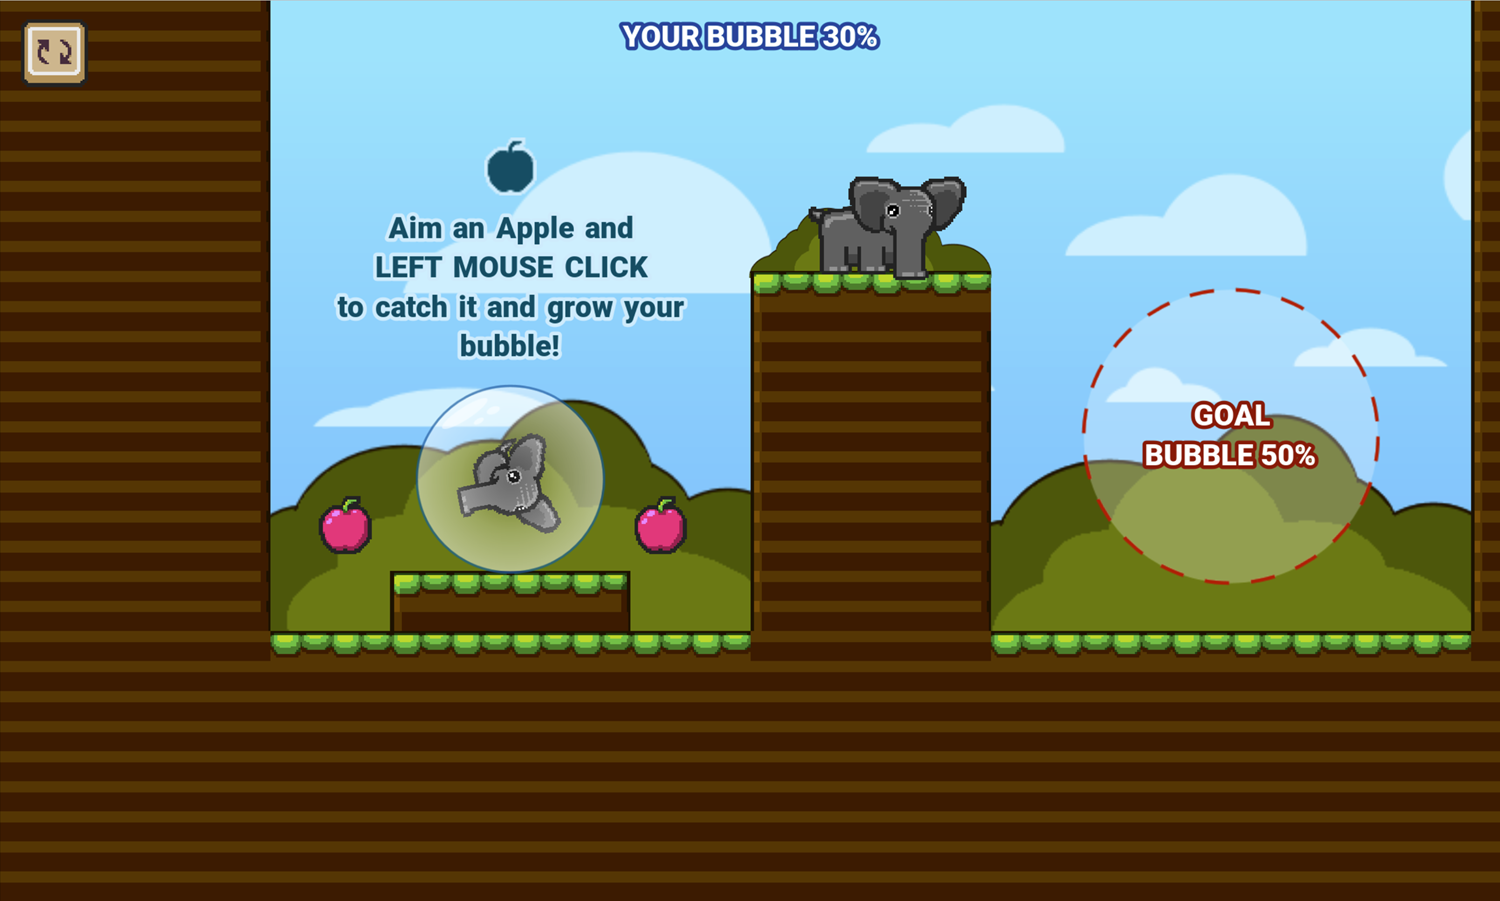 Heliumphant Game Collecting Apples Instructions Screen Screenshot.